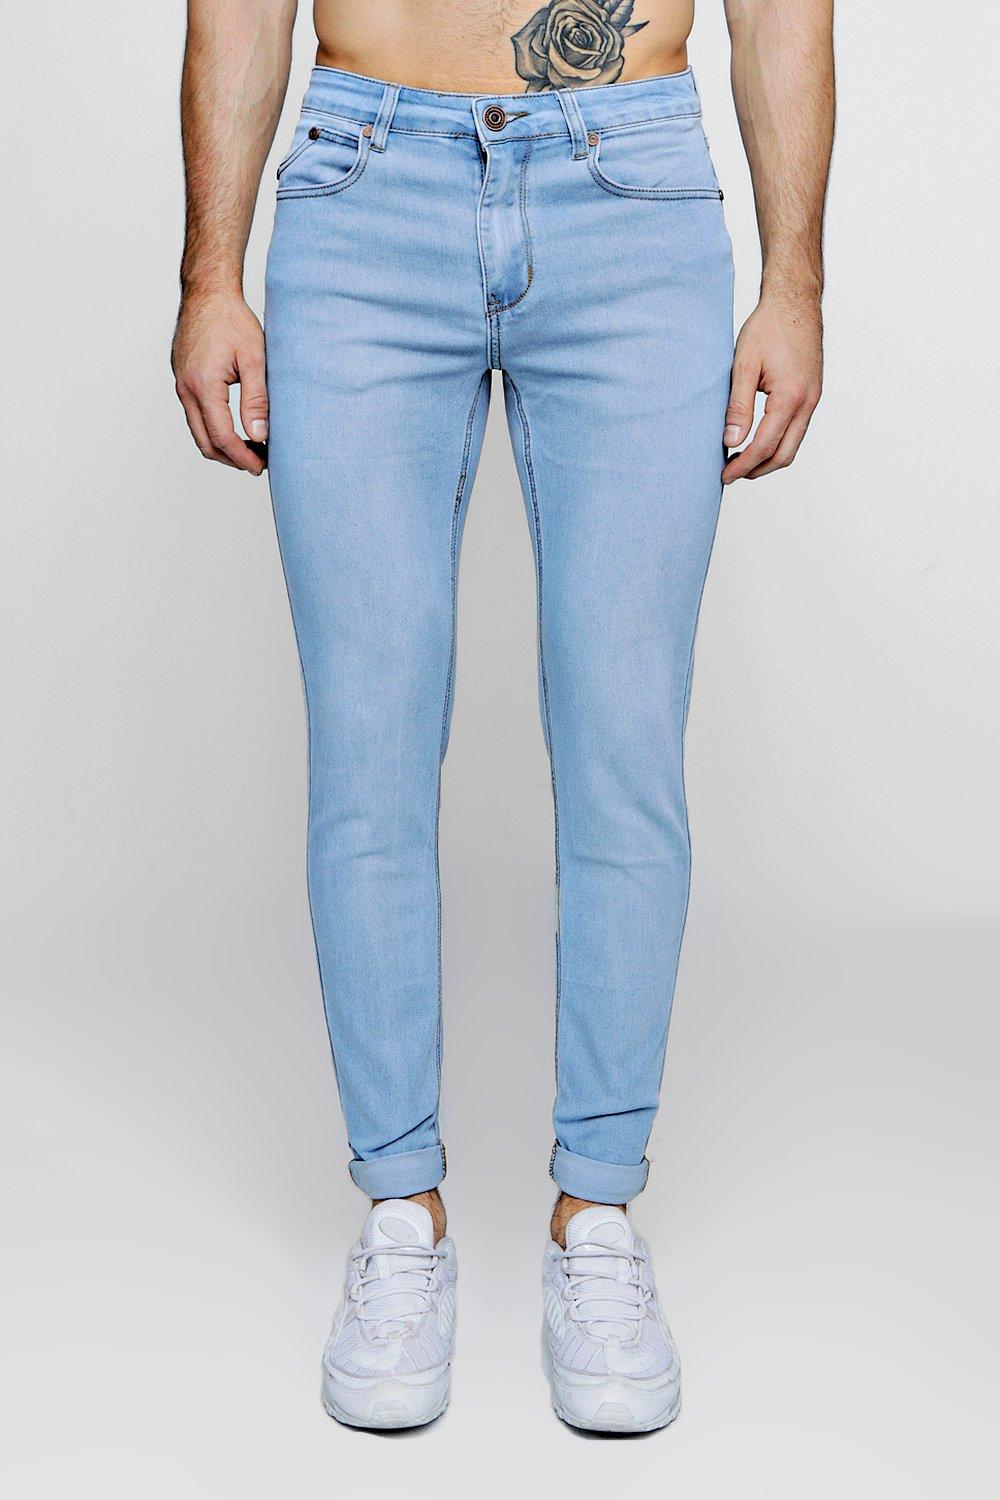 Stone Washed Stretch Skinny Fit Jeans |